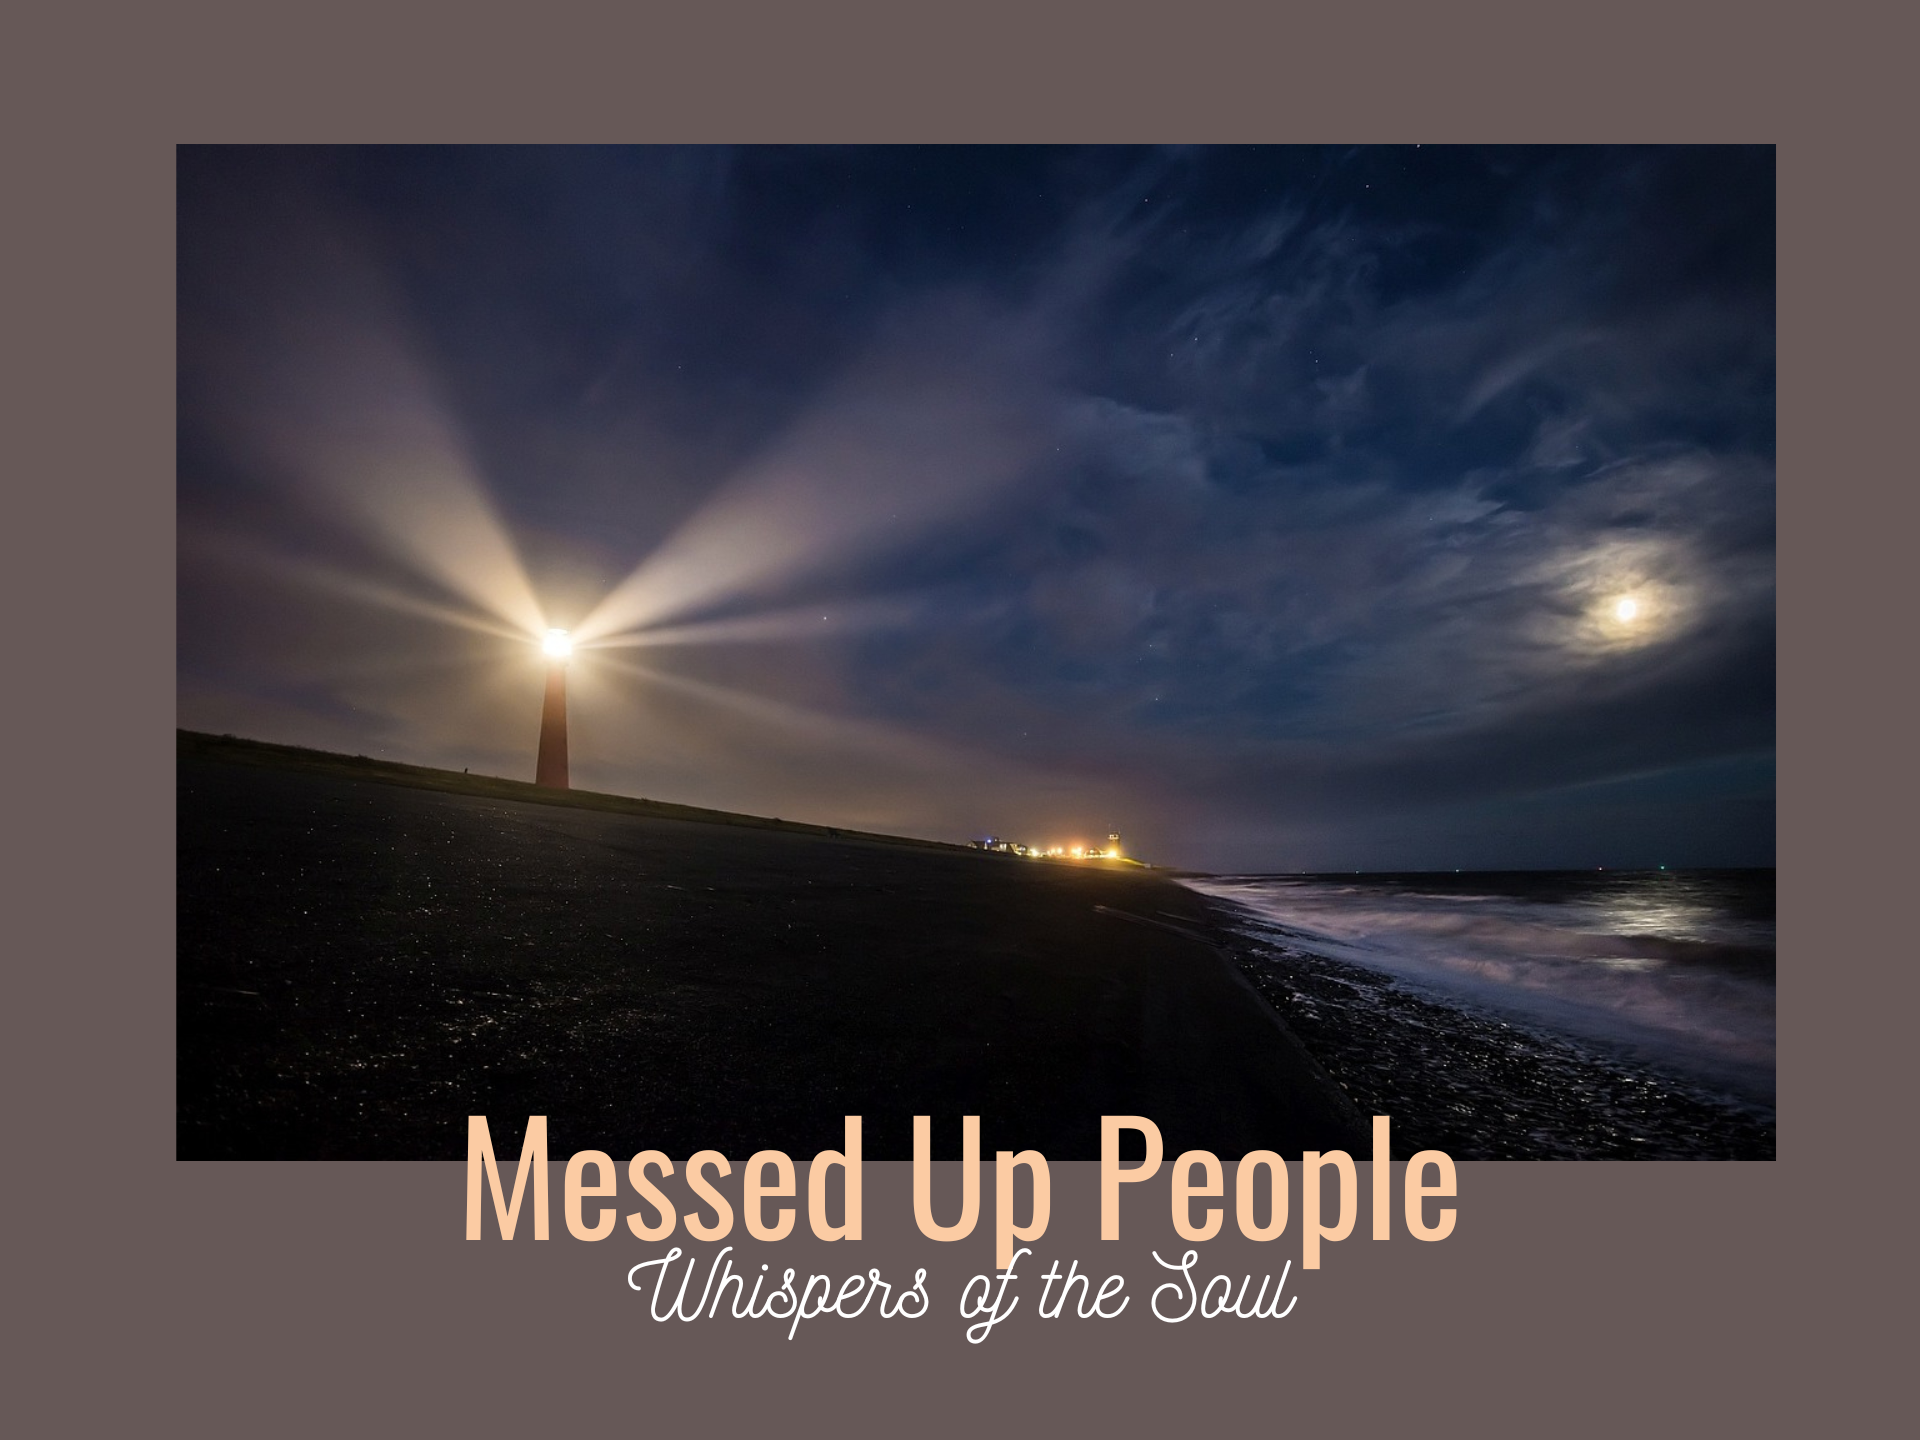 Messed Up People: A Call to Shine